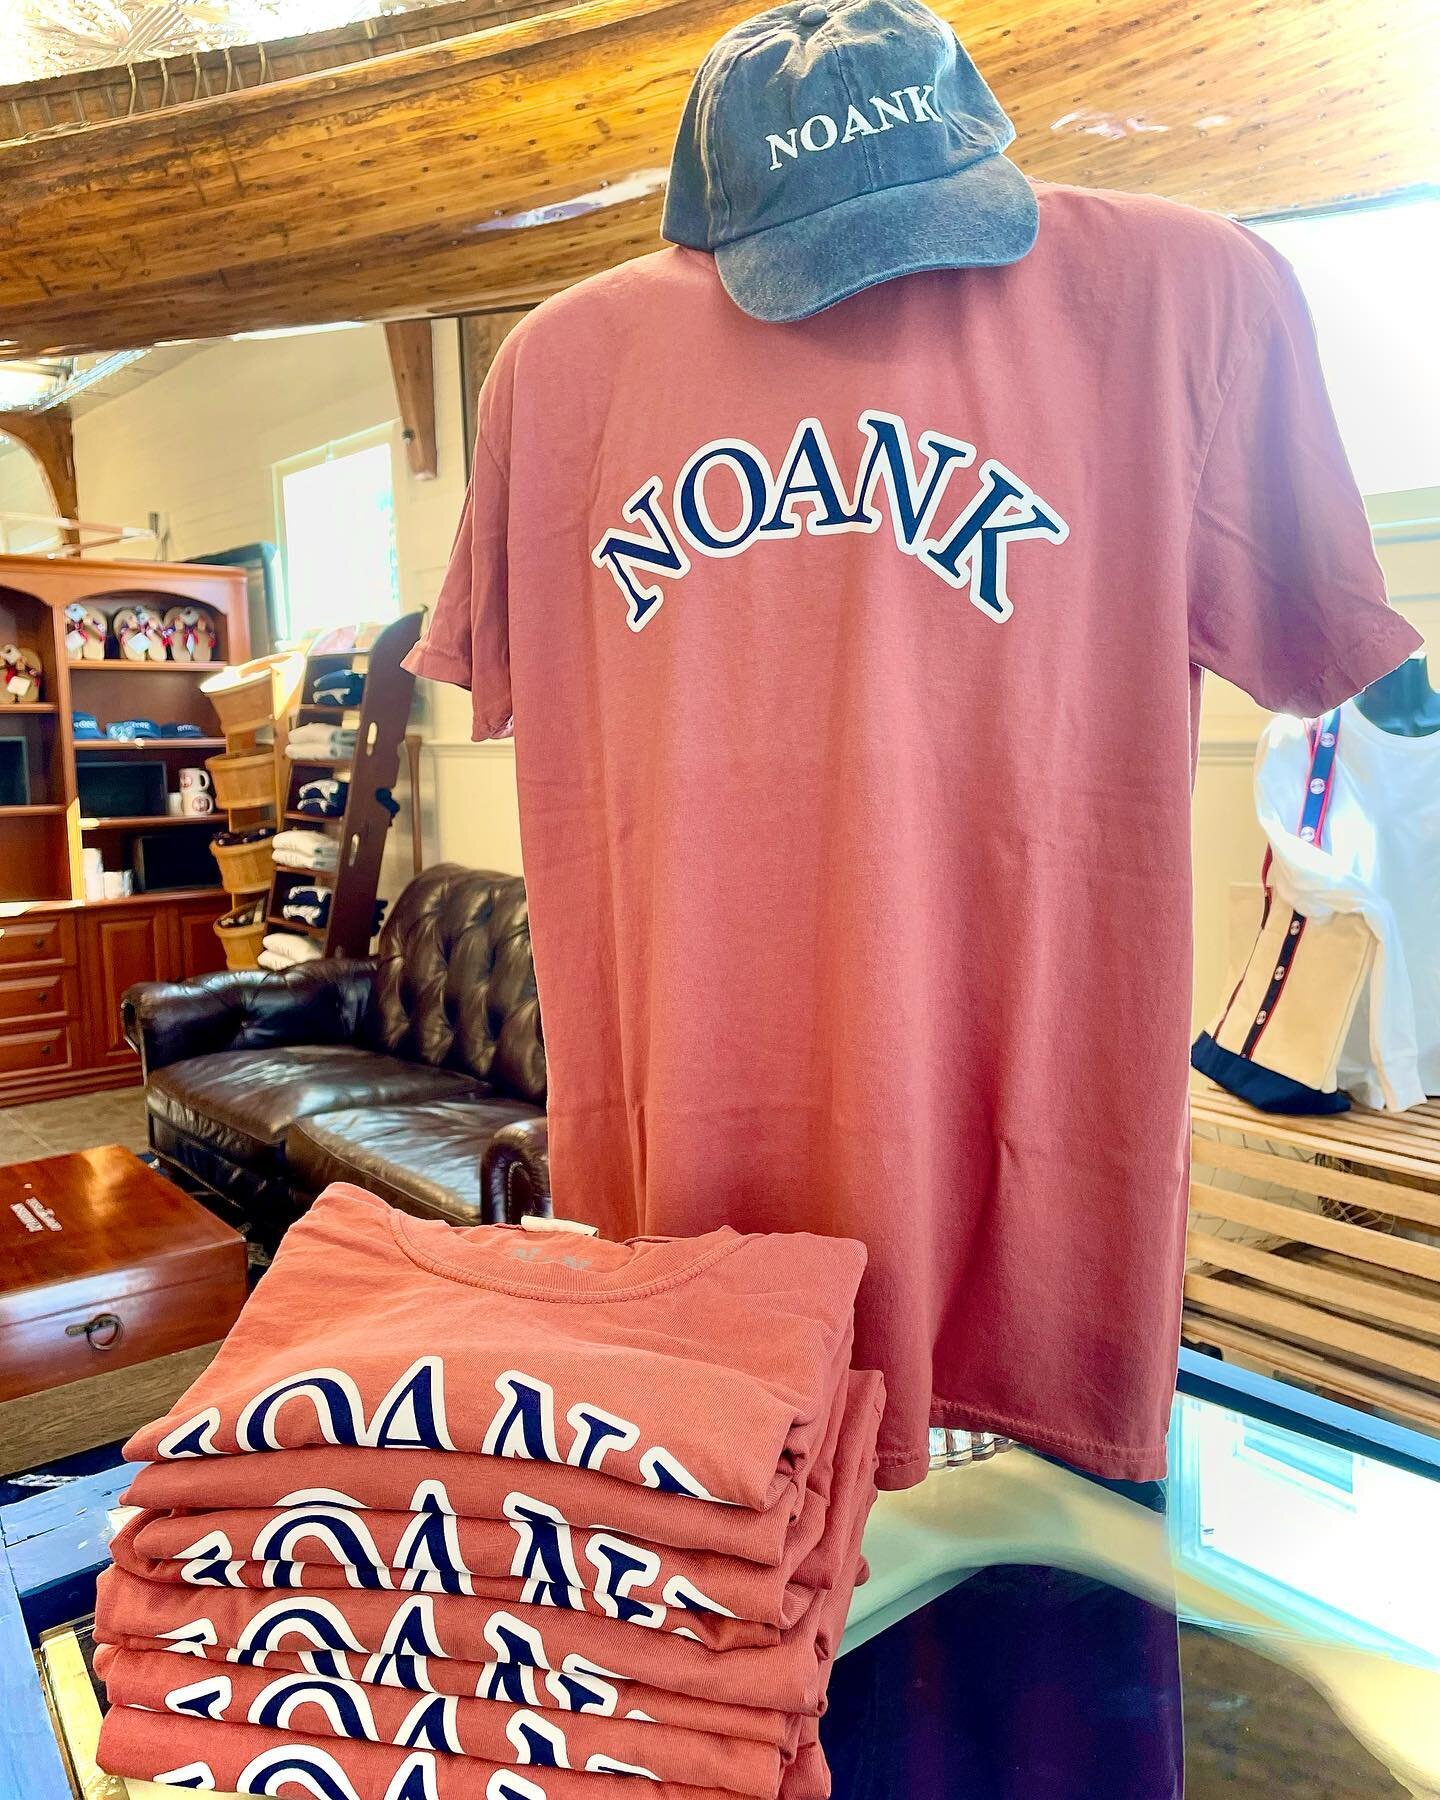 New tees in!! These are definitely a personal favorite of ours around here. These bad boys are a beautiful, muted Sailors Red. 
PS they&rsquo;re super soft!! 😍
.
.
.
.
.

#noank #noankct #local #localmerch #shopct #shoplocal #tshirt #newengland #cla